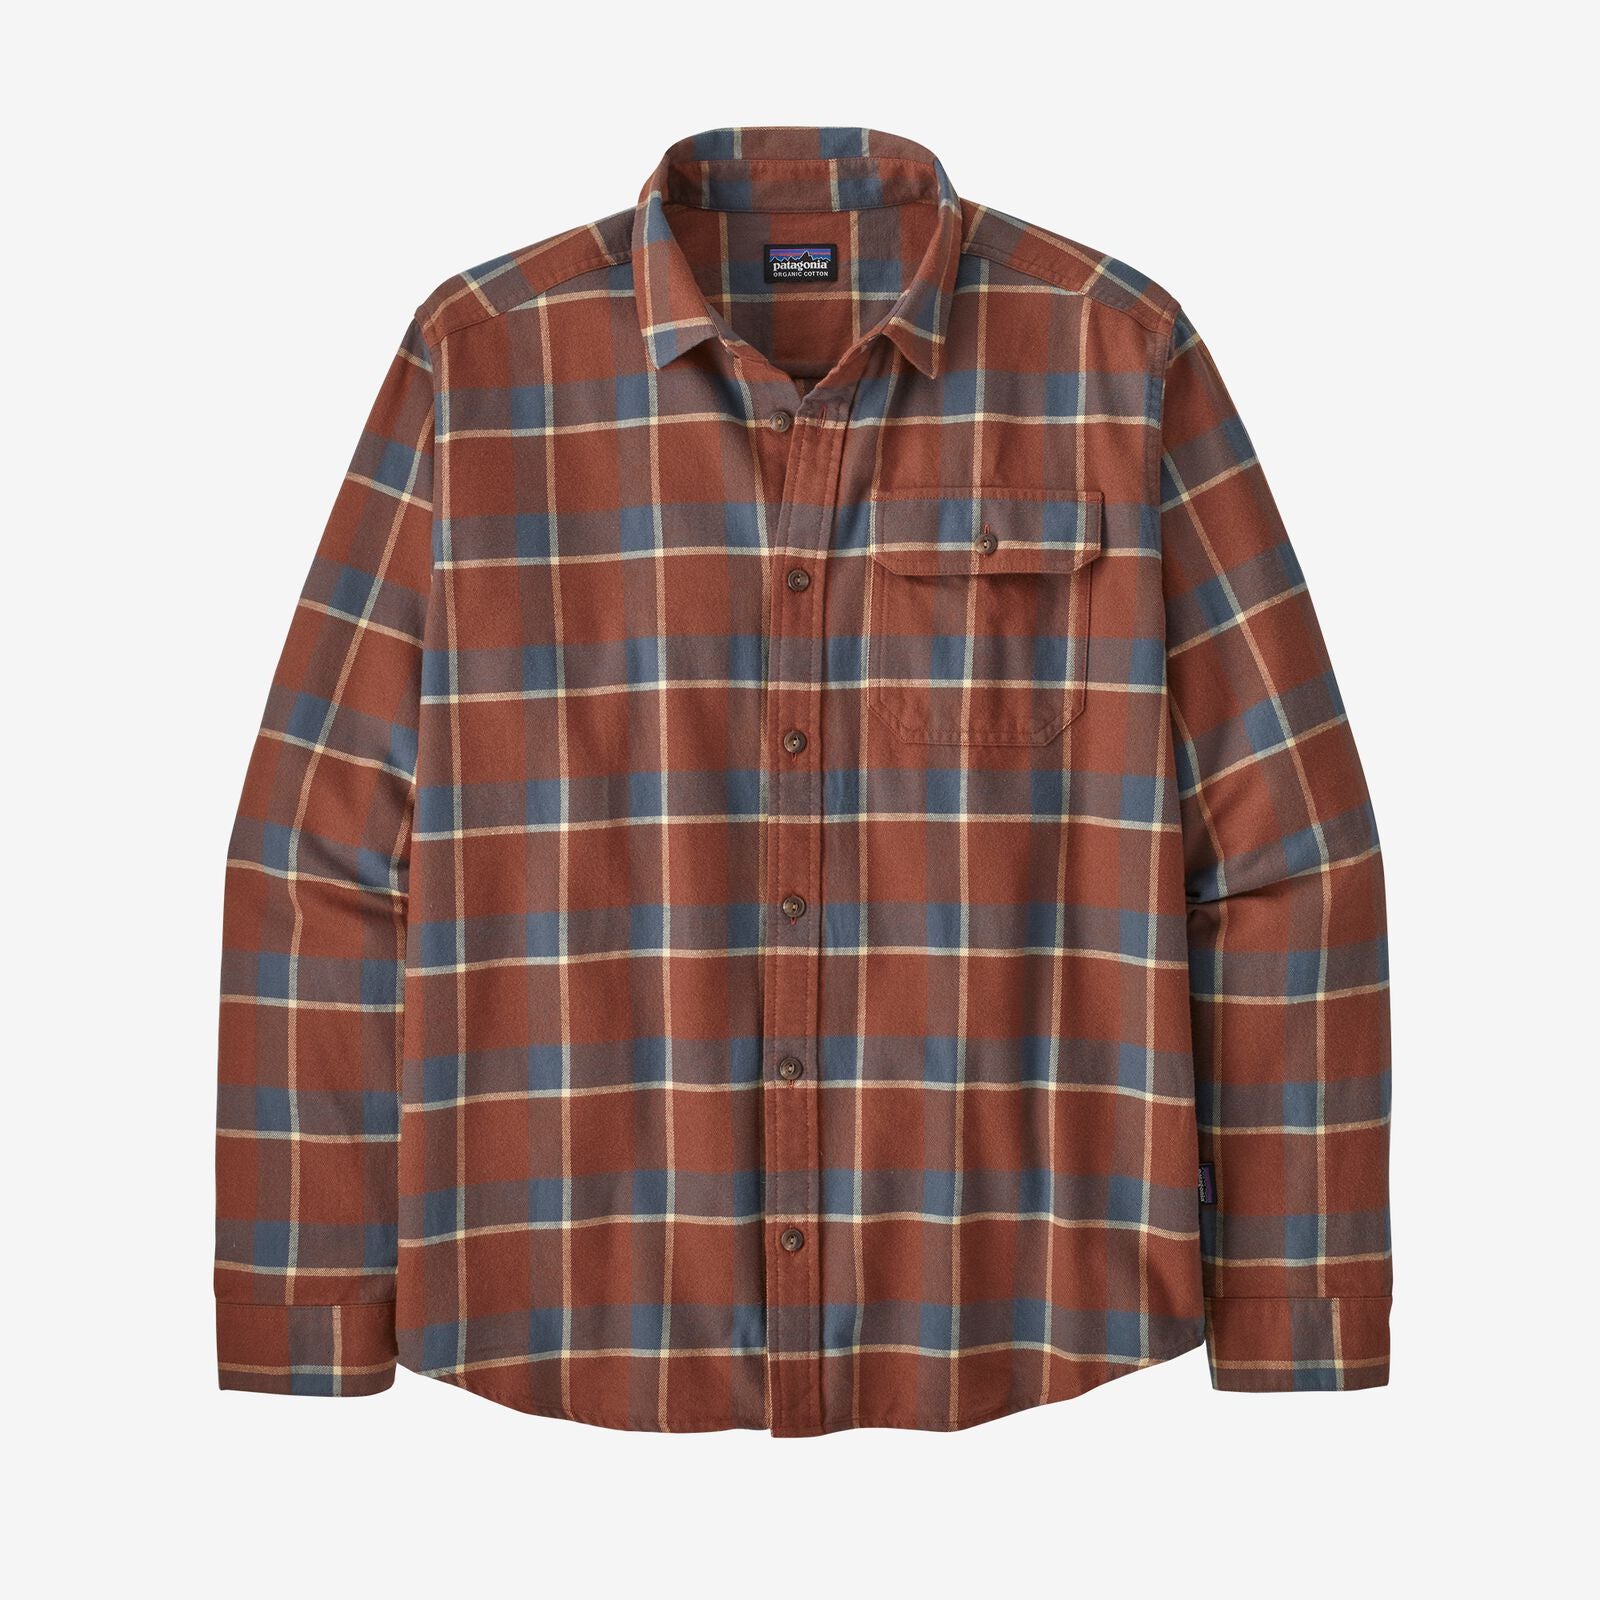 Patagonia - M's L/S Cotton in Controversial LW Fjord Flannel Shirt - Sisu Brown